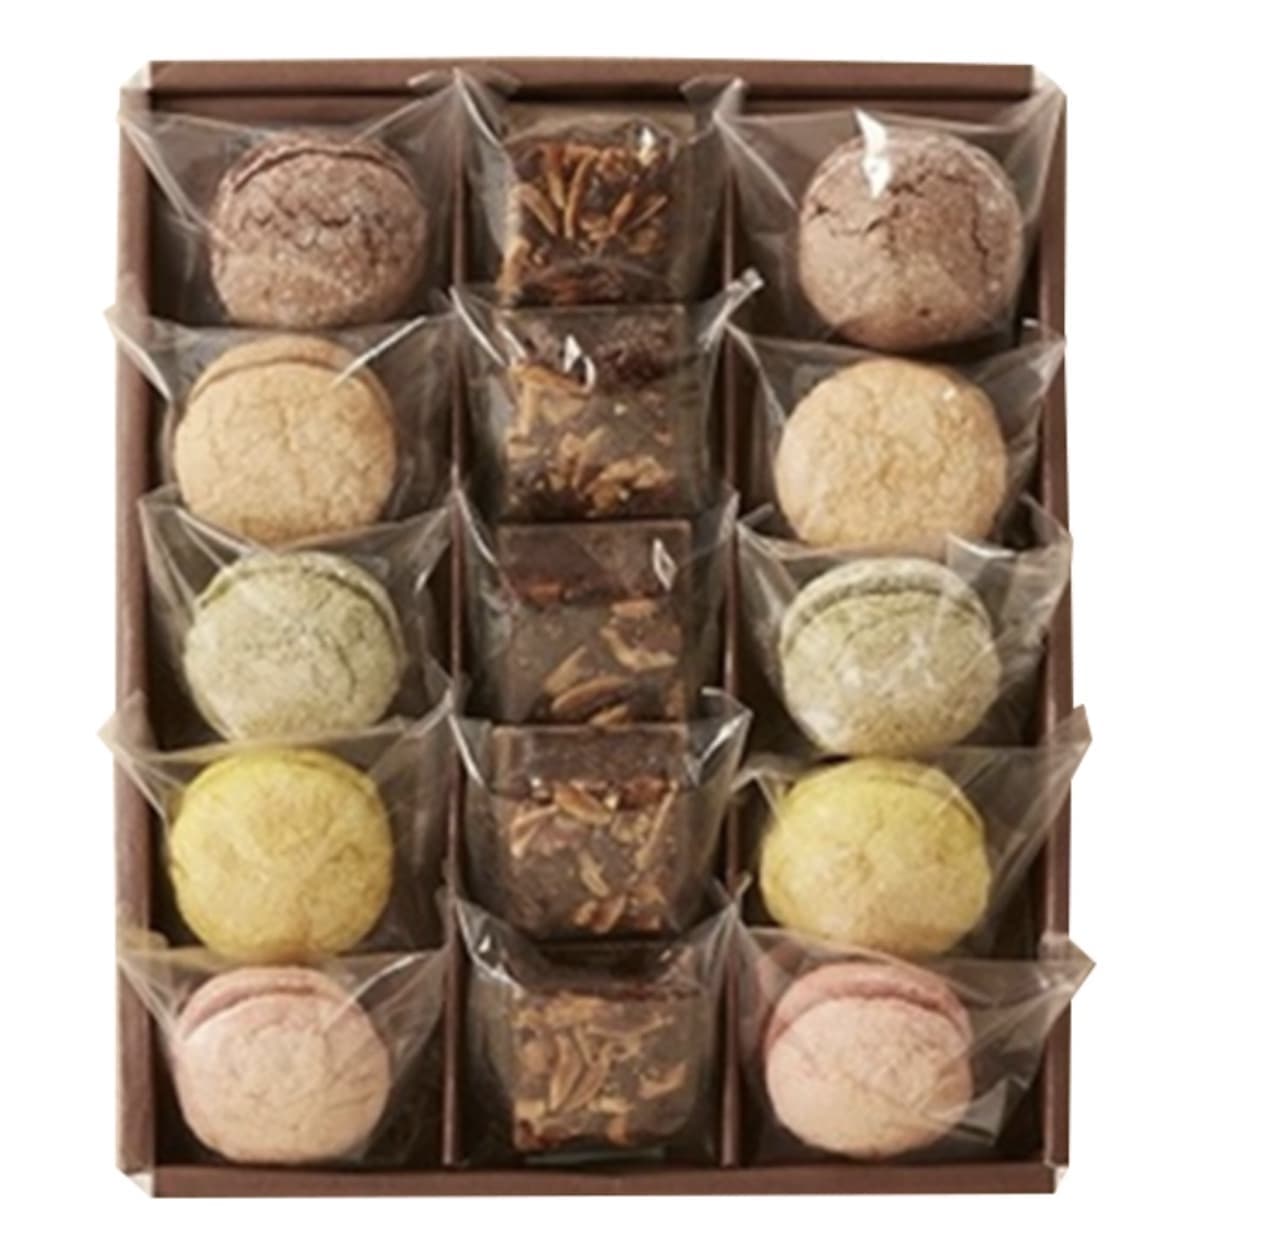 Chateraise new gift "Bonbon Macaroon Assortment 15 pieces".